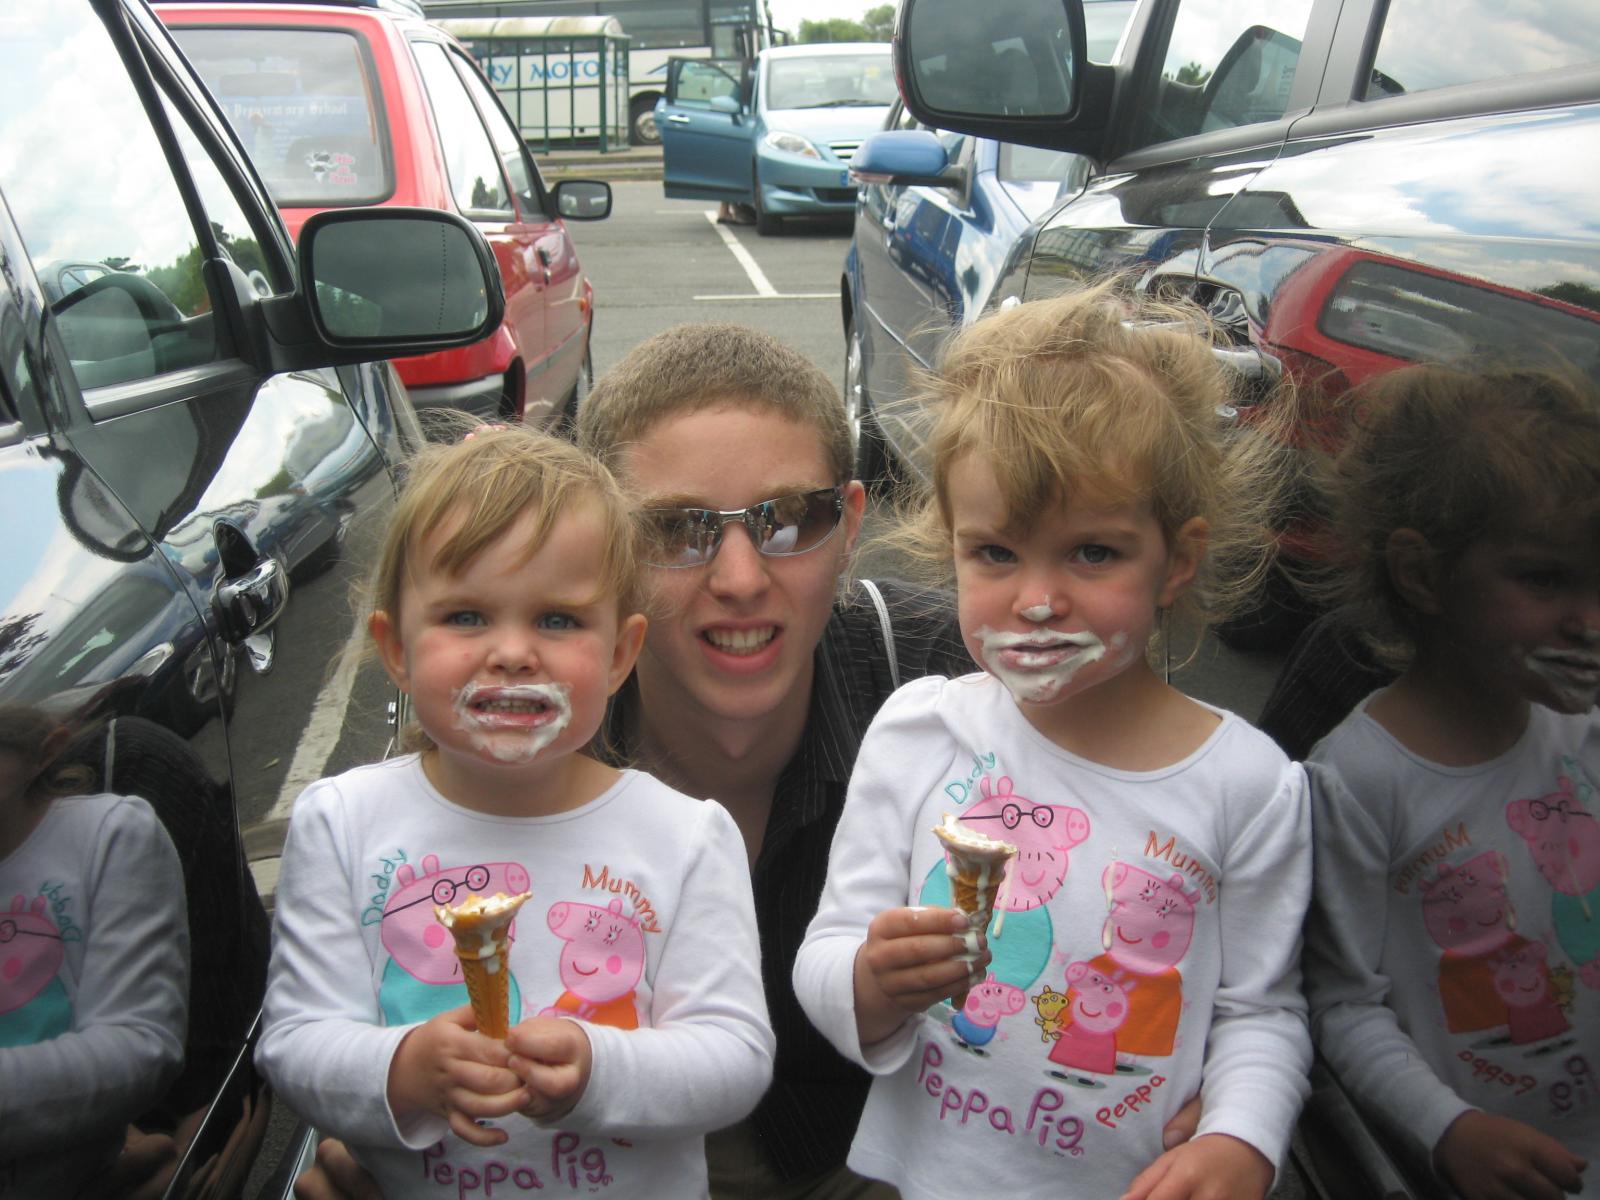 Myself and my nieces Emma and Sophie